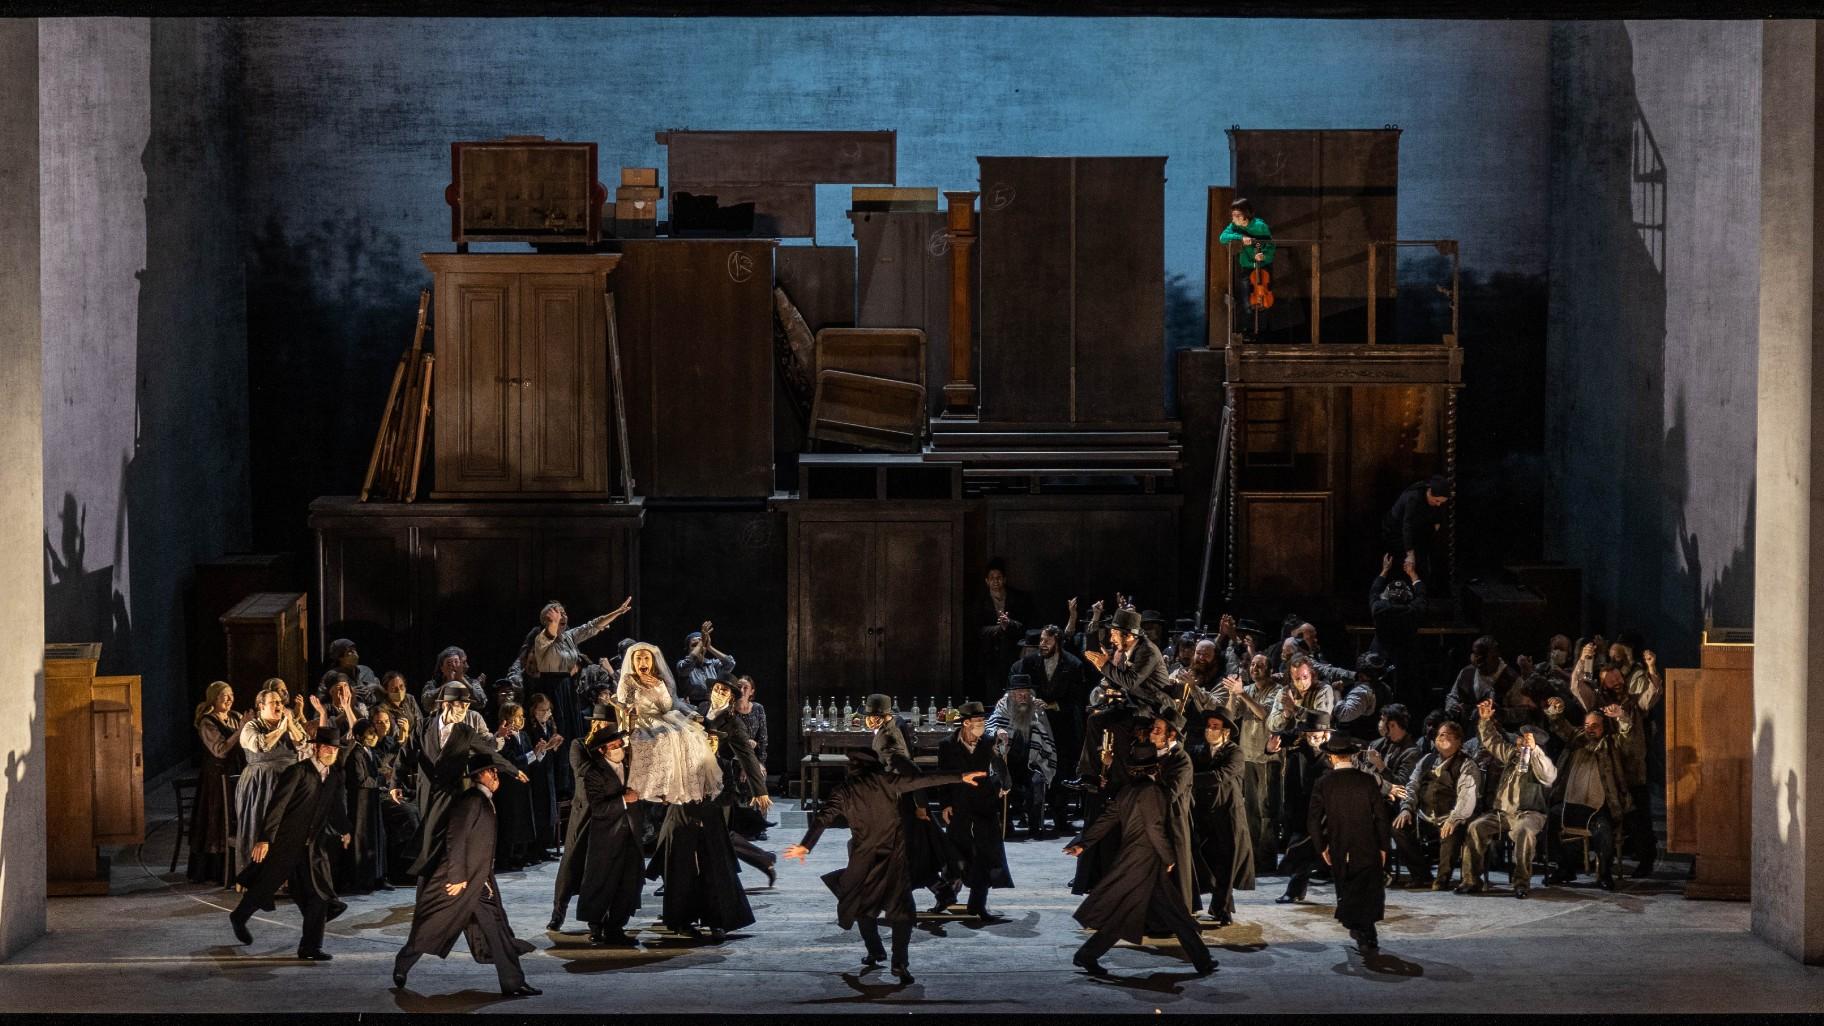 The company performs in Barrie Kosky’s production of “Fiddler on the Roof” at the Lyric Opera House. (Credit: Todd Rosenberg)